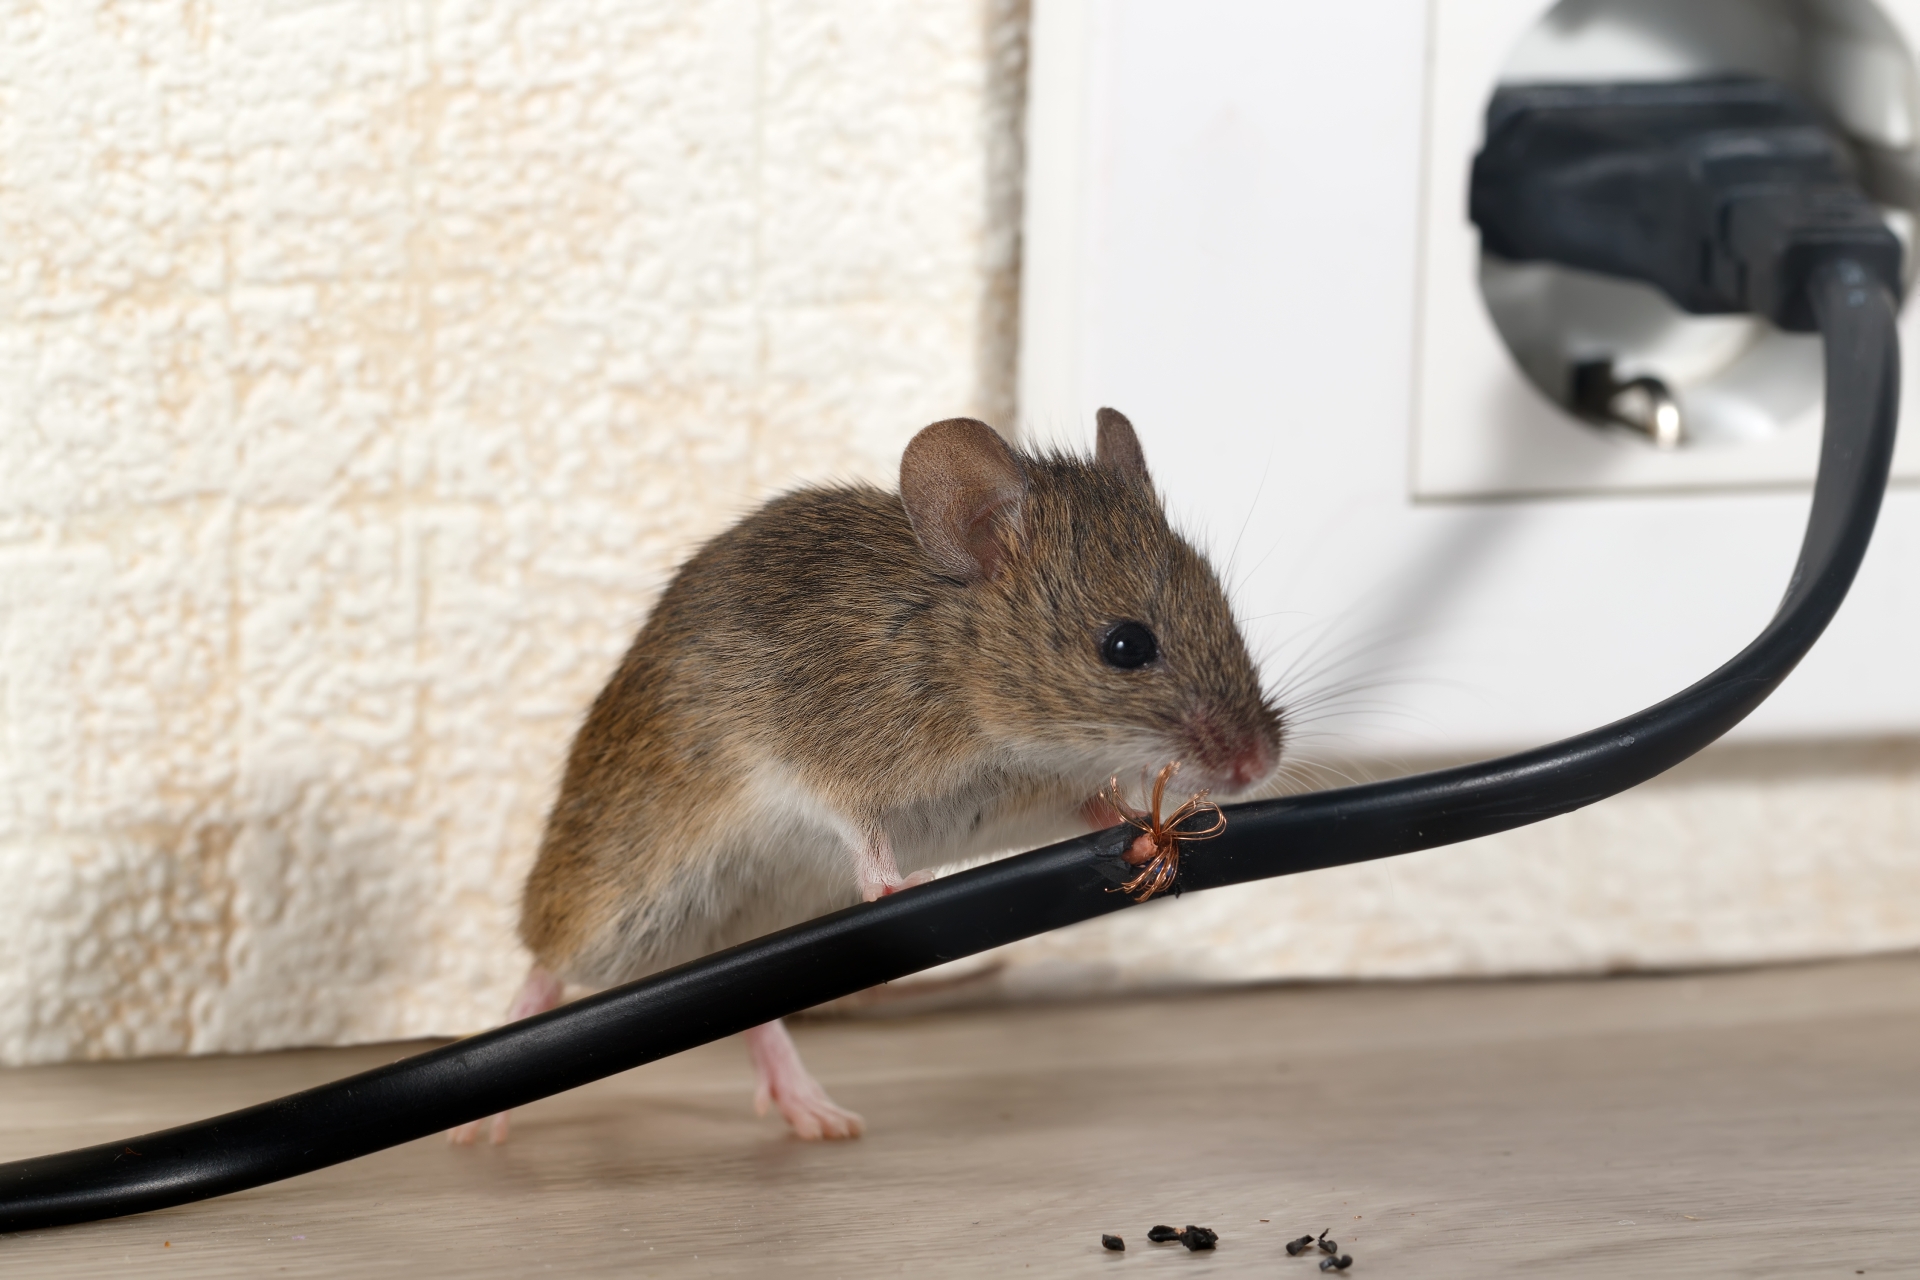 Mice Infestation, Pest Control in South Woodford, E18. Call Now 020 8166 9746